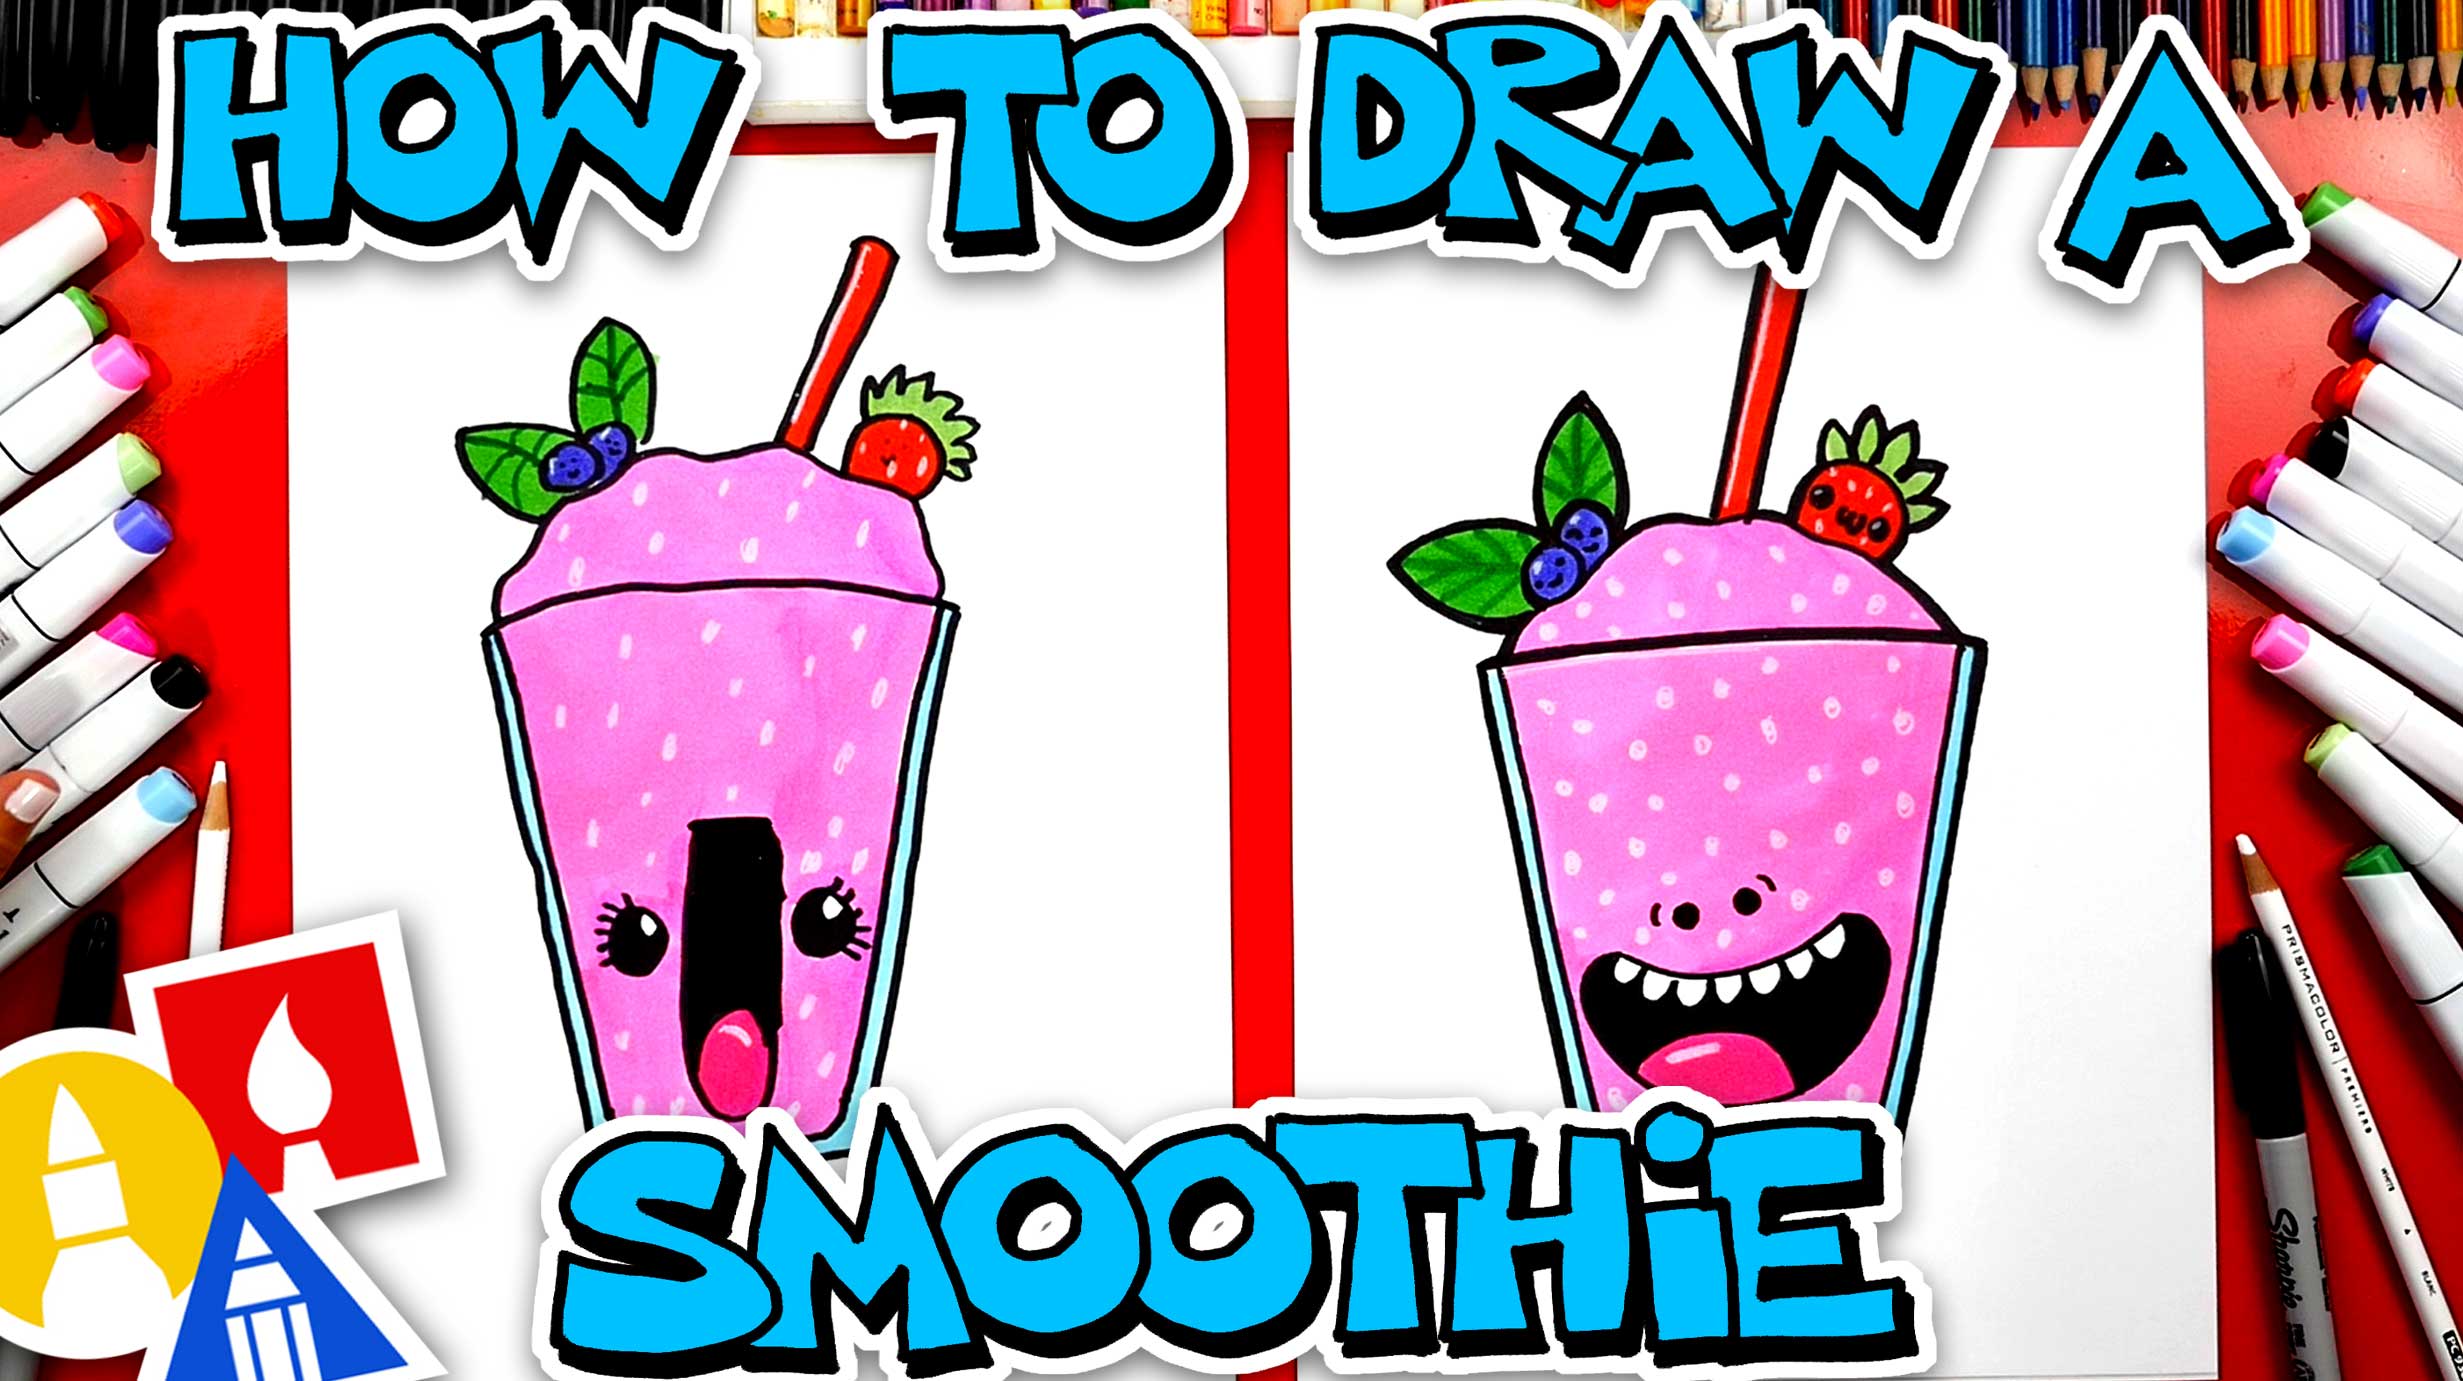 How To Draw A Funny Frozen Fruit Smoothie - Art For Kids Hub